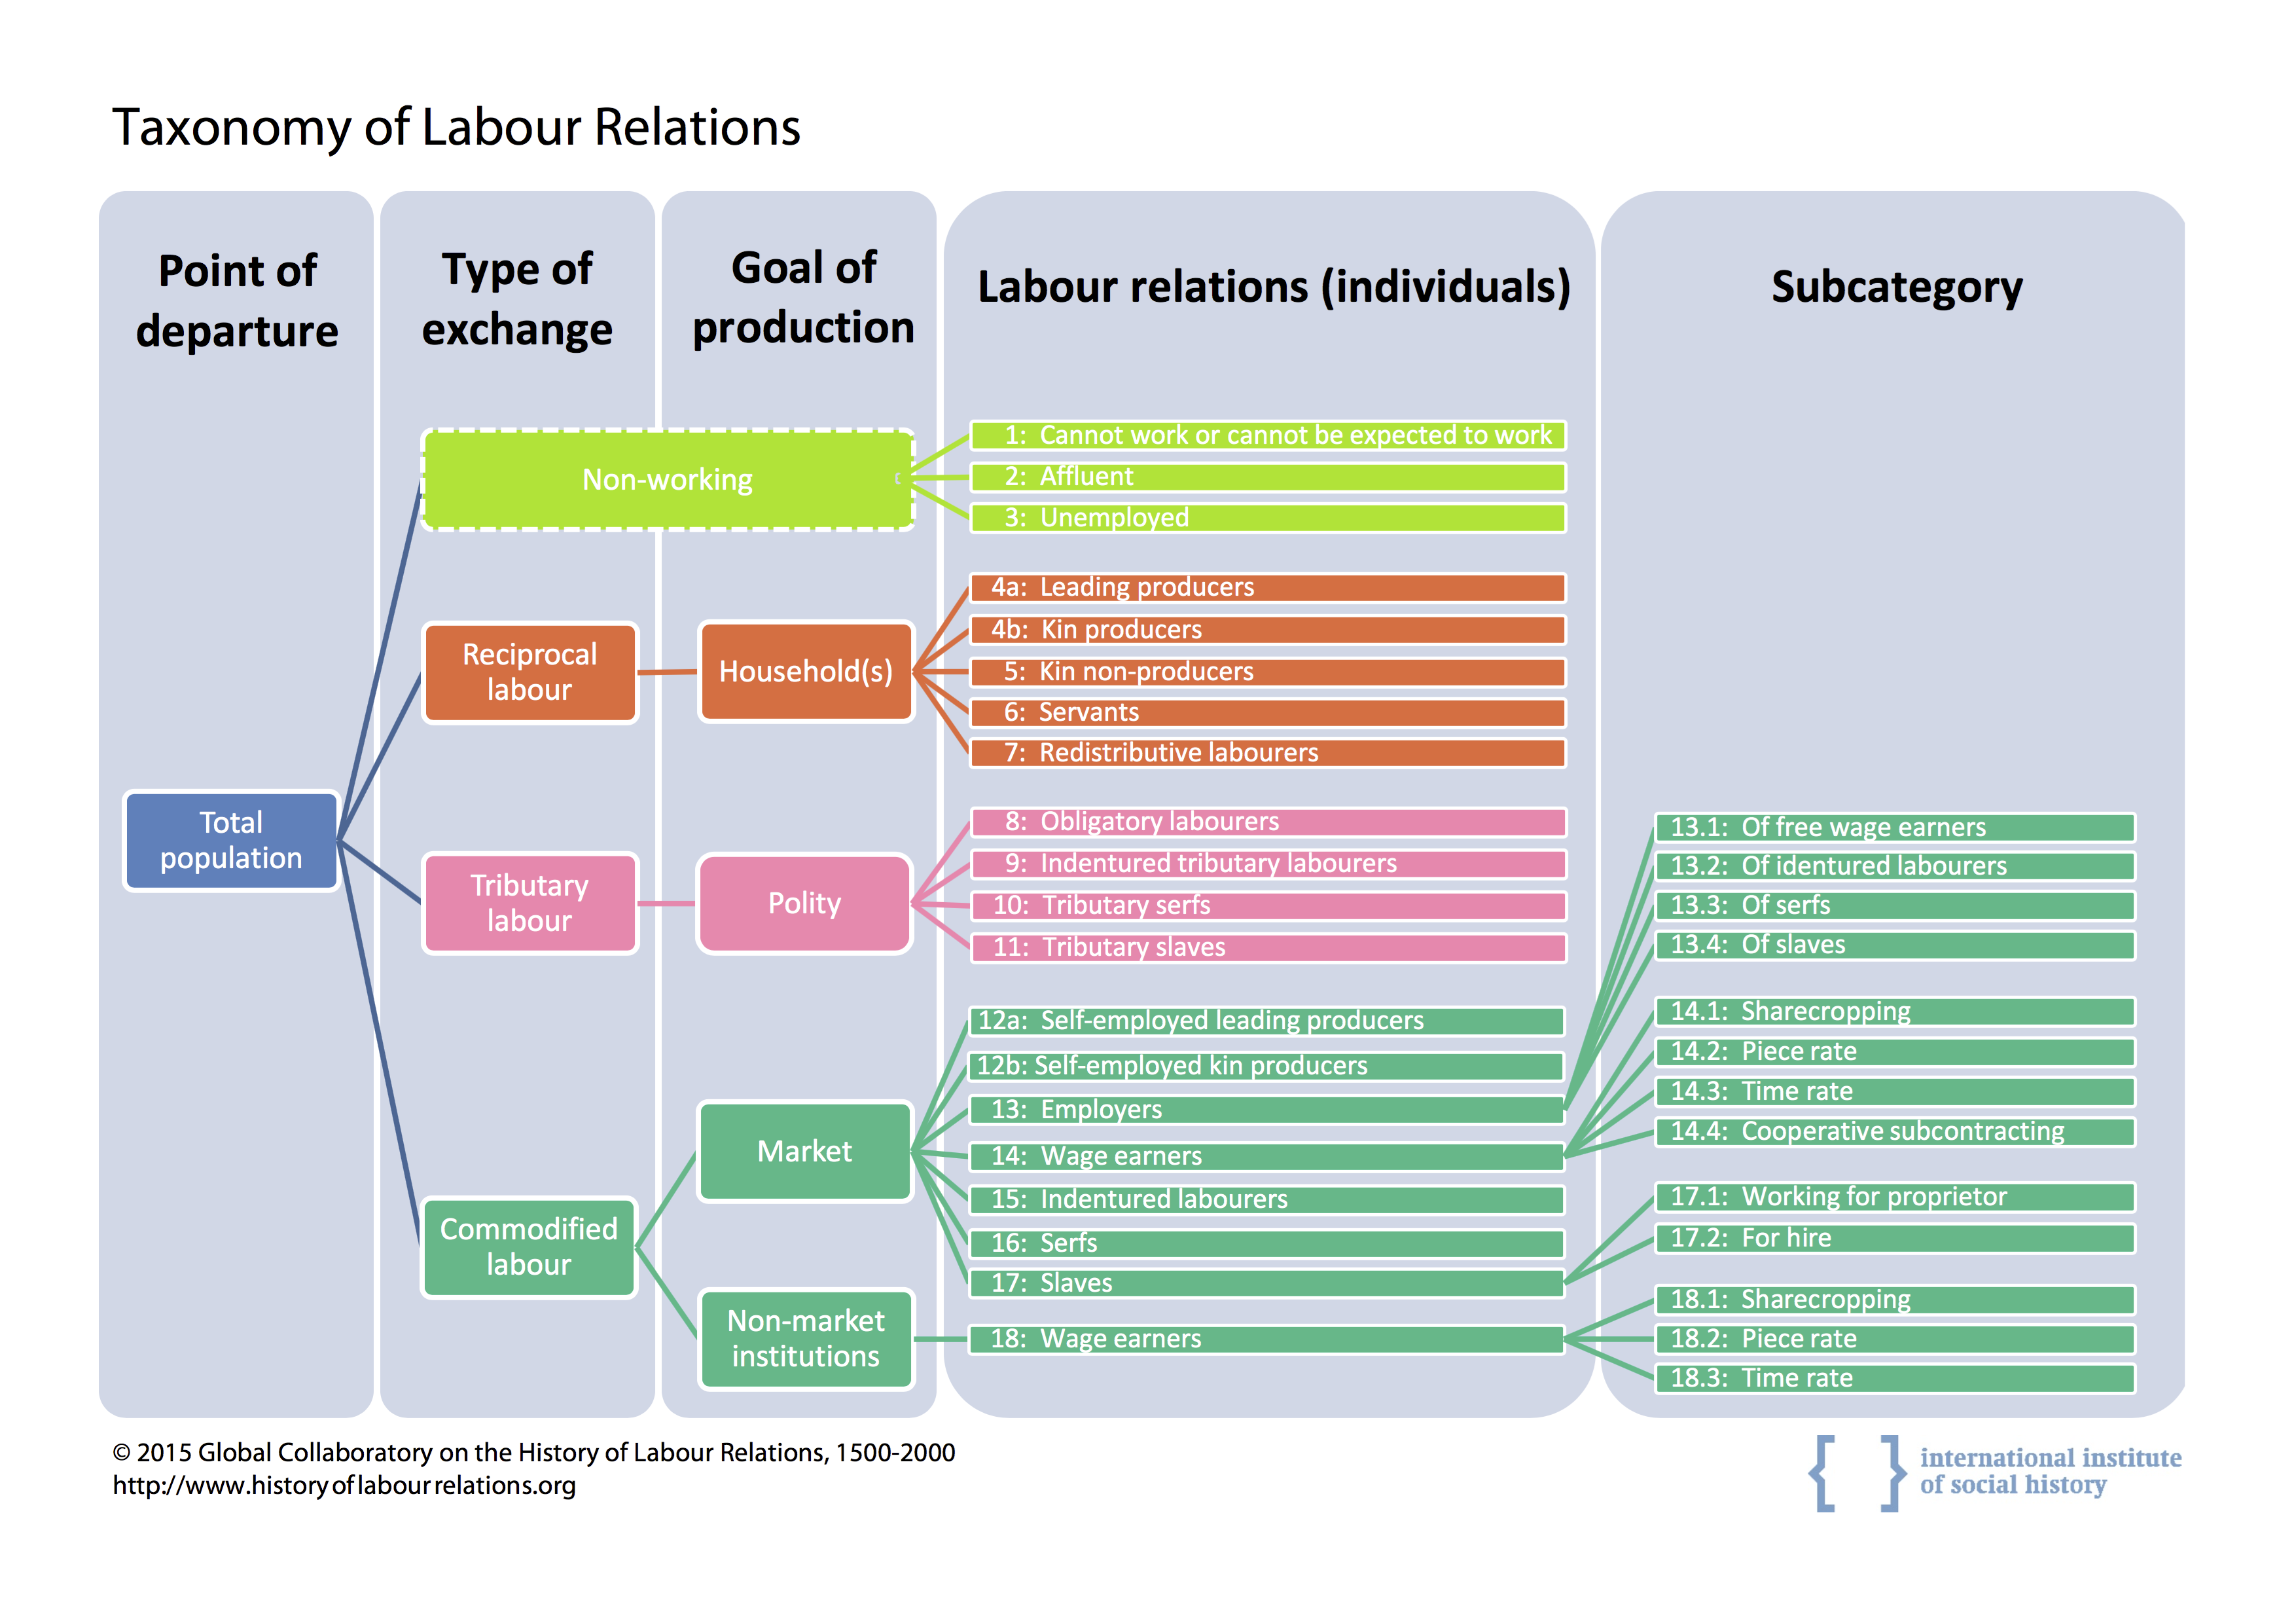 Figure 1. Taxonomy of the Global Collaboratory on the History of Labour Relations, 1500-2000.